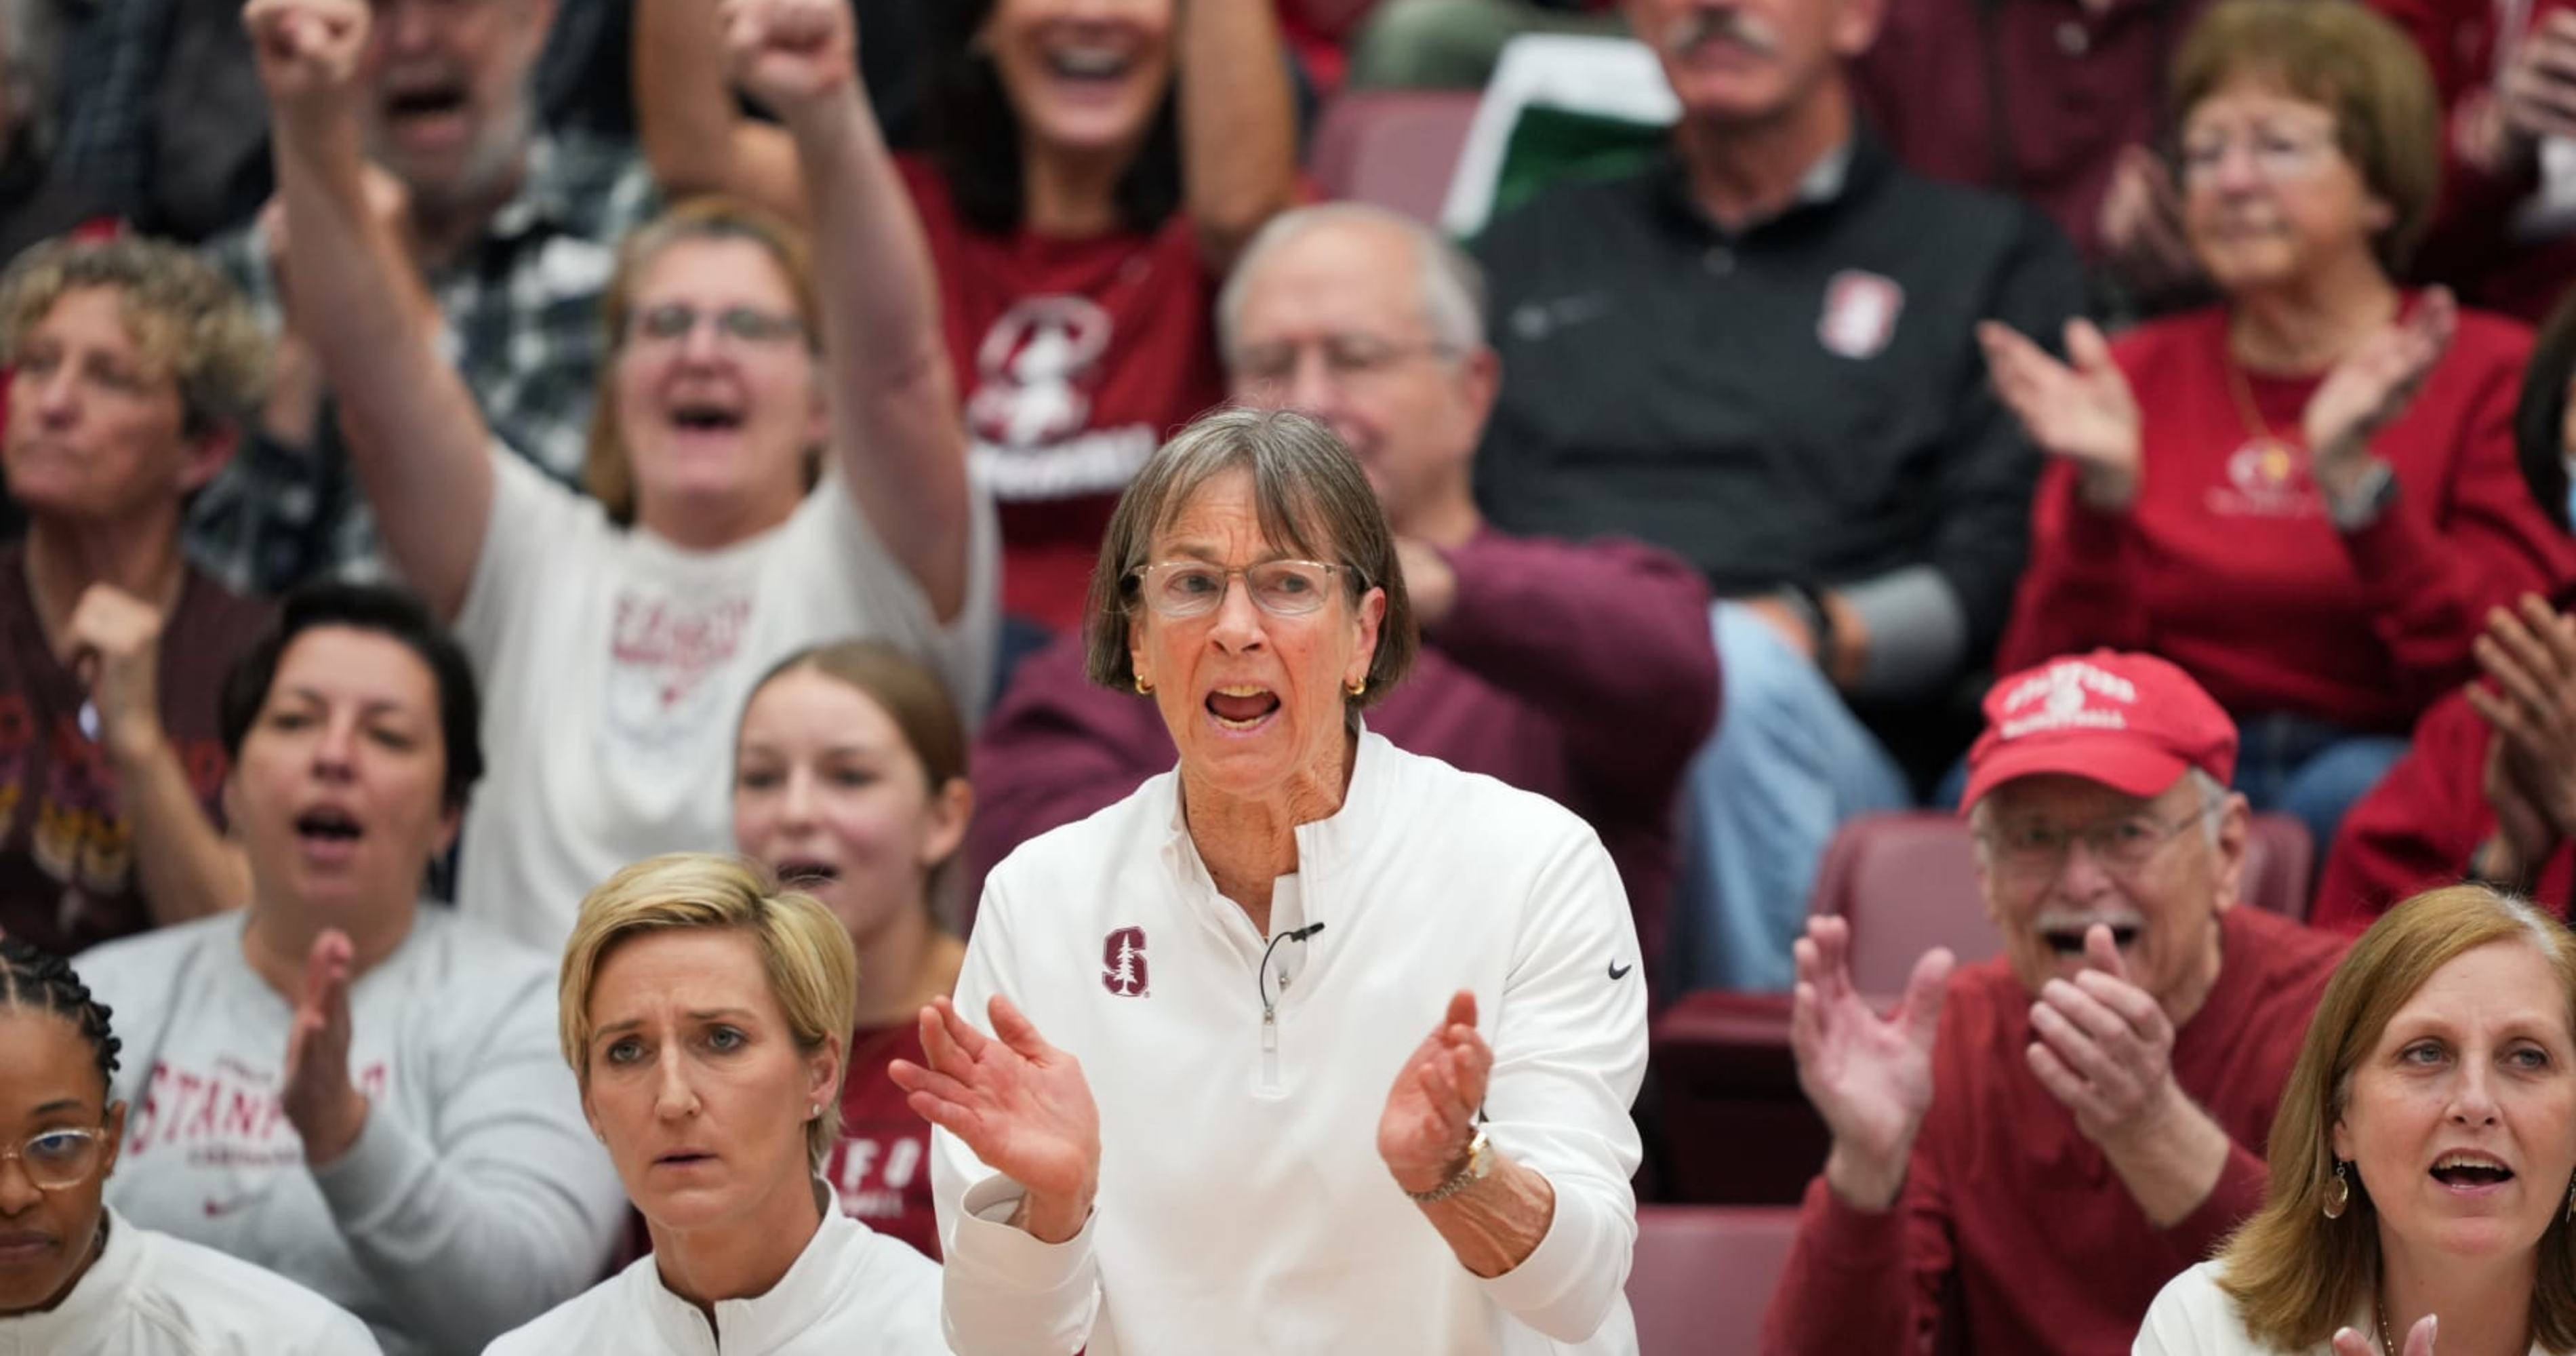 Stanford Names Basketball Court to Honor Tara VanDerveer After Retirement as WCBB HC